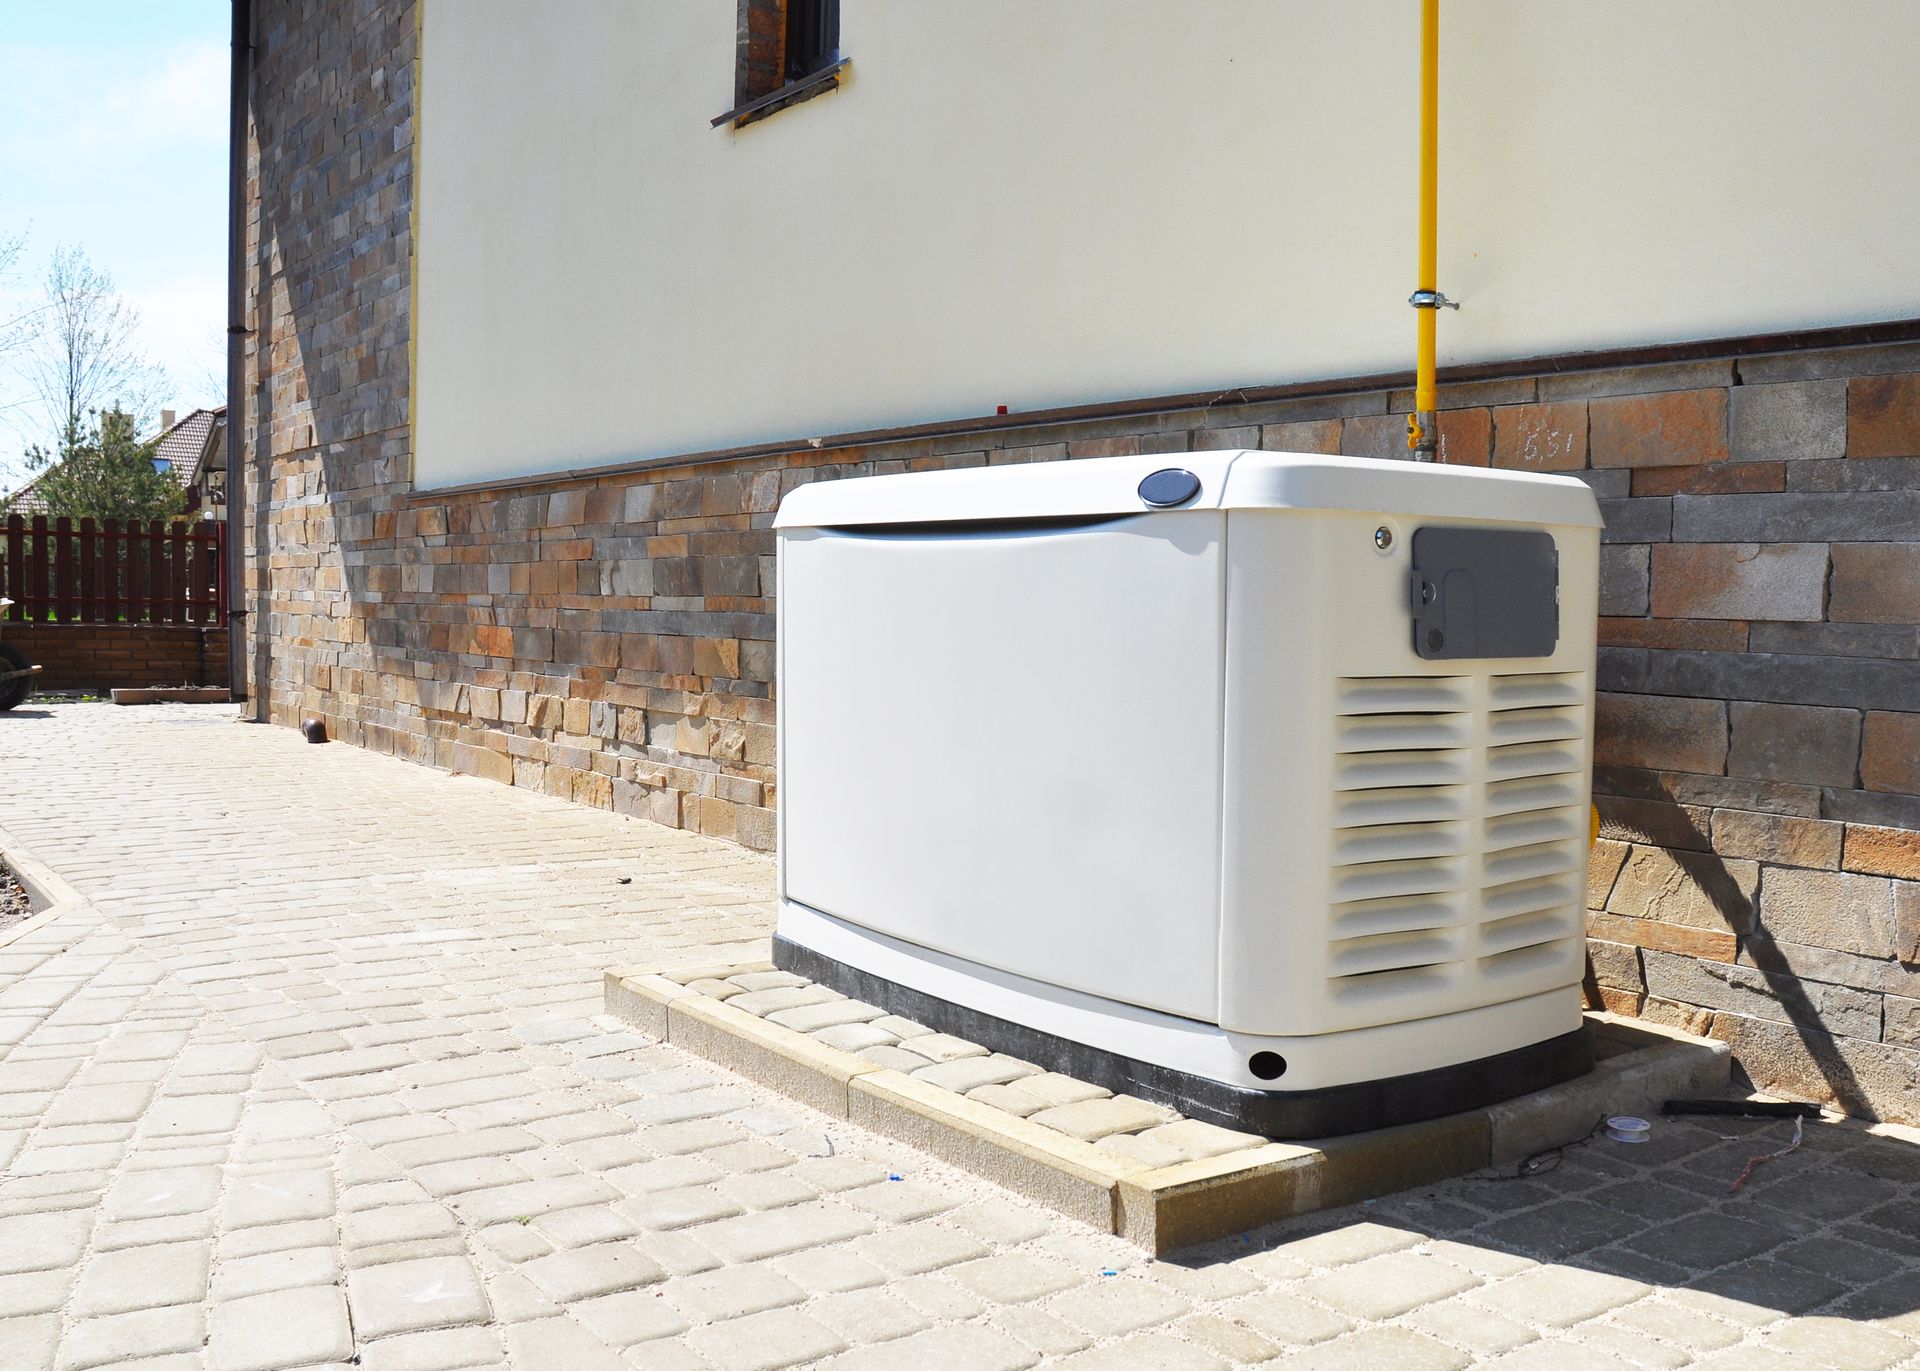 A white generator is sitting on the side of a building.